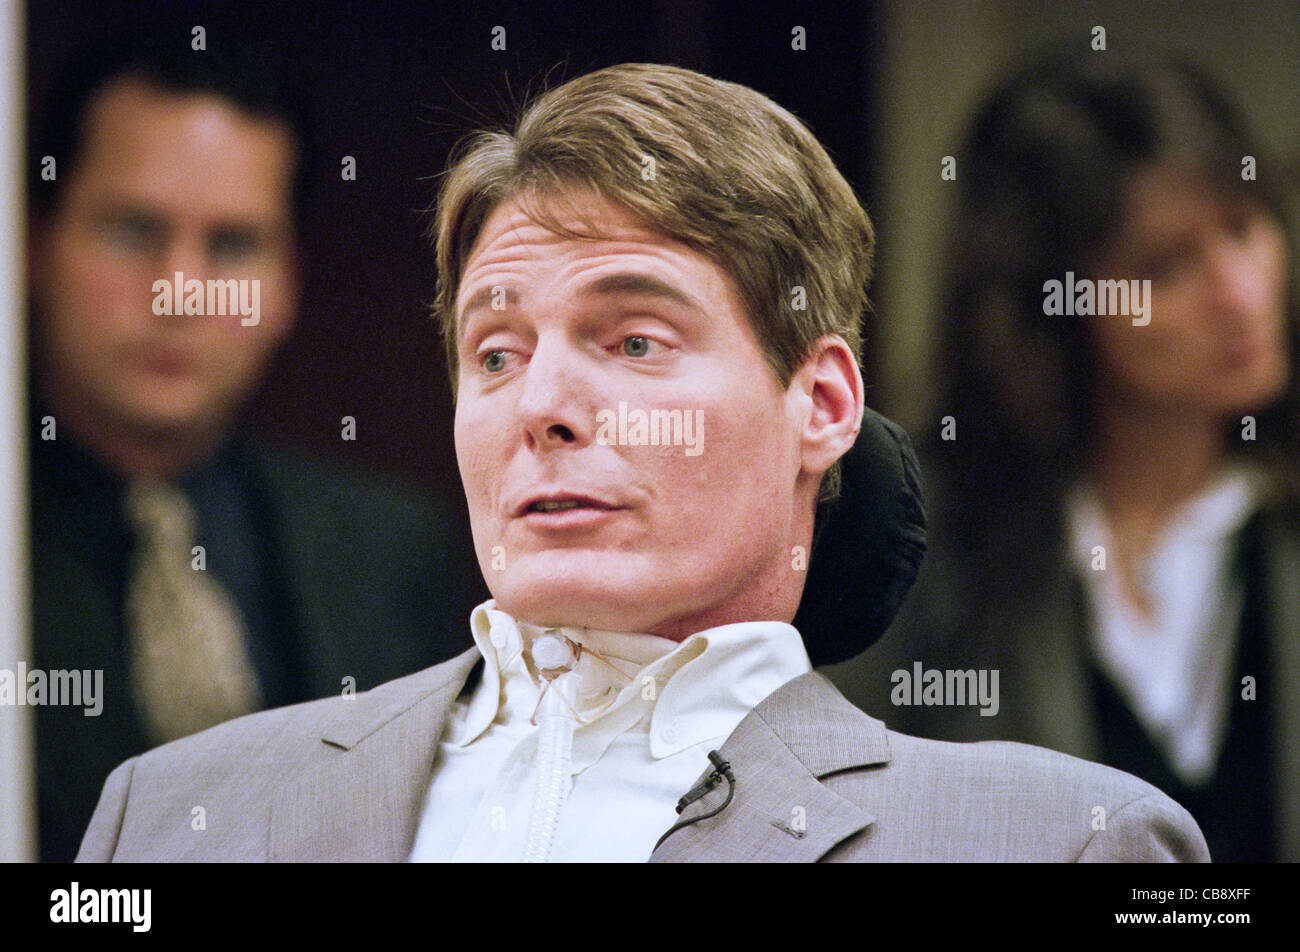 Actor Christopher Reeve makes a statement financial burdens of disable persons to a Congressional hearing April 14, 1999 in Washington, DC. Reeve's was paralyzed in a horse riding accident and has become an outspoken advocate for the disabled. Stock Photo